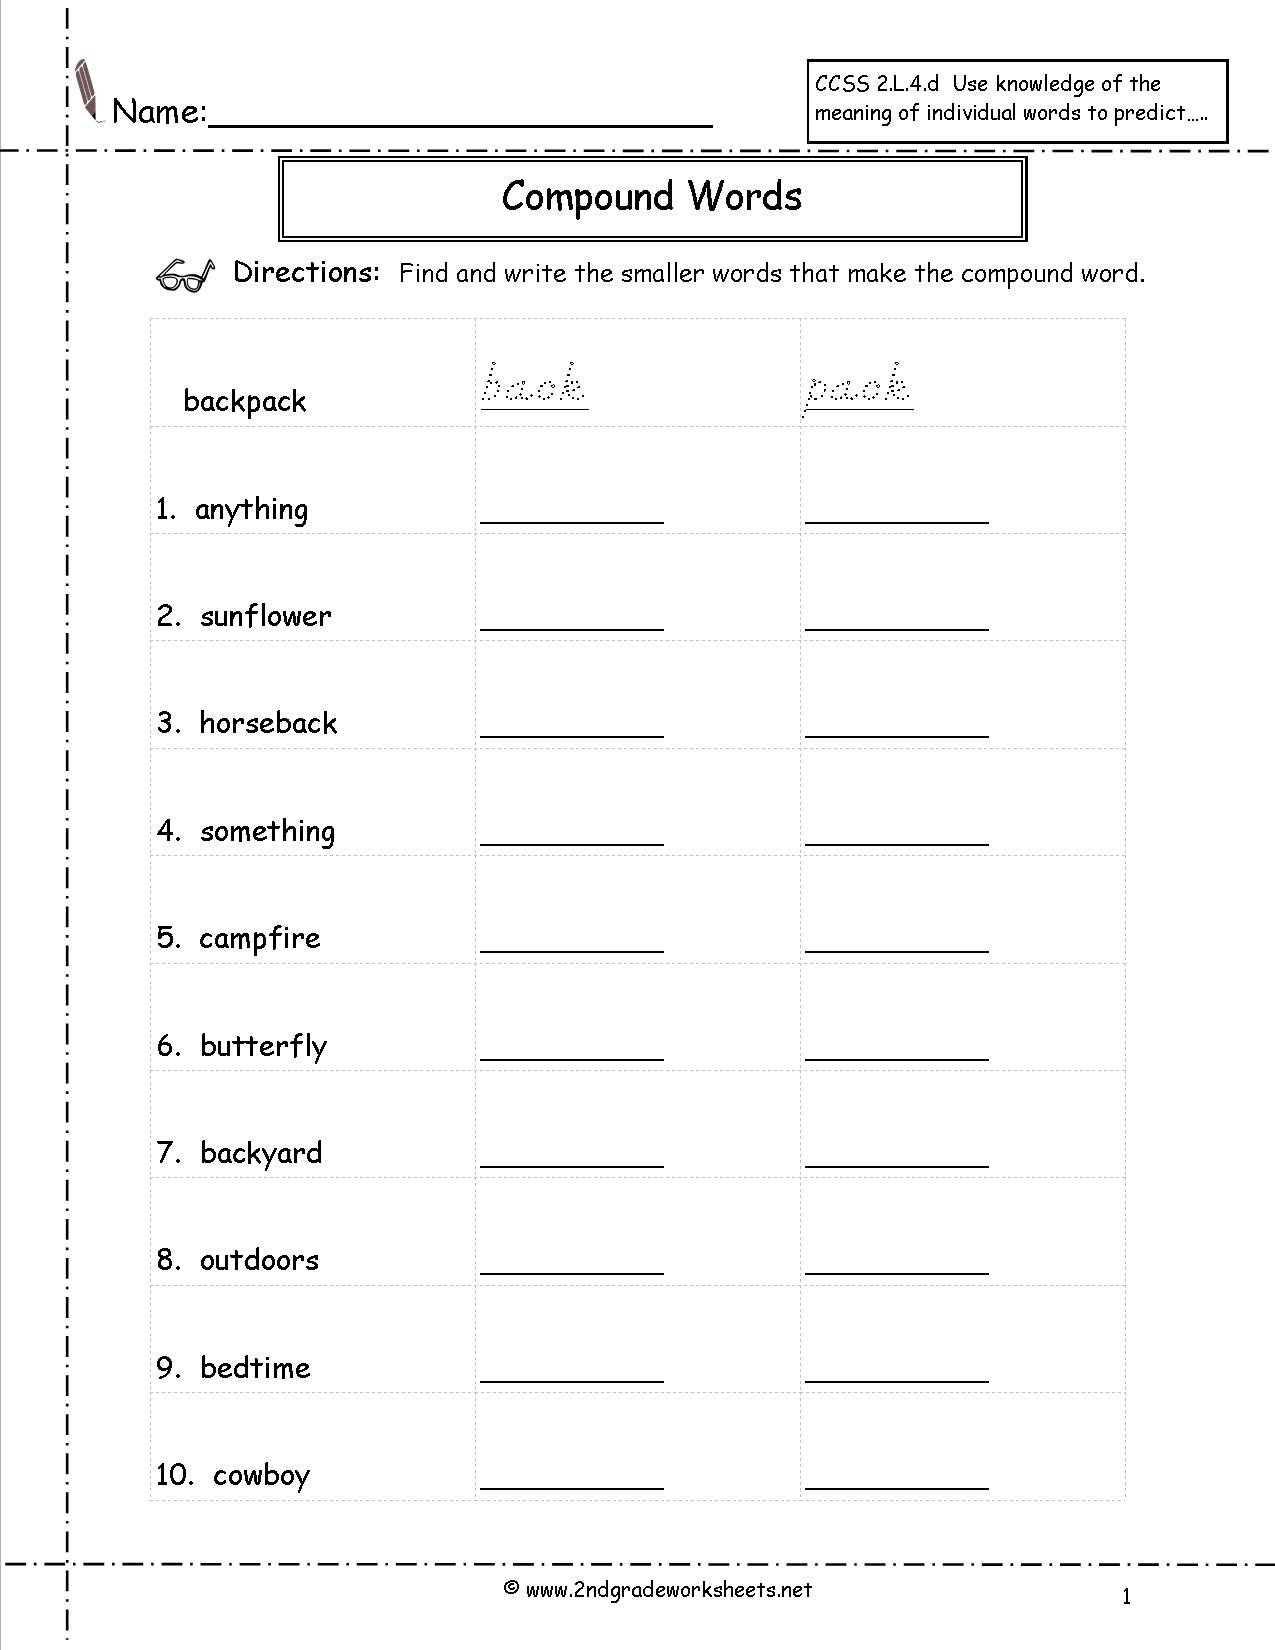 Free Languagegrammar Worksheets And Printouts For 2Nd Grade English Worksheets